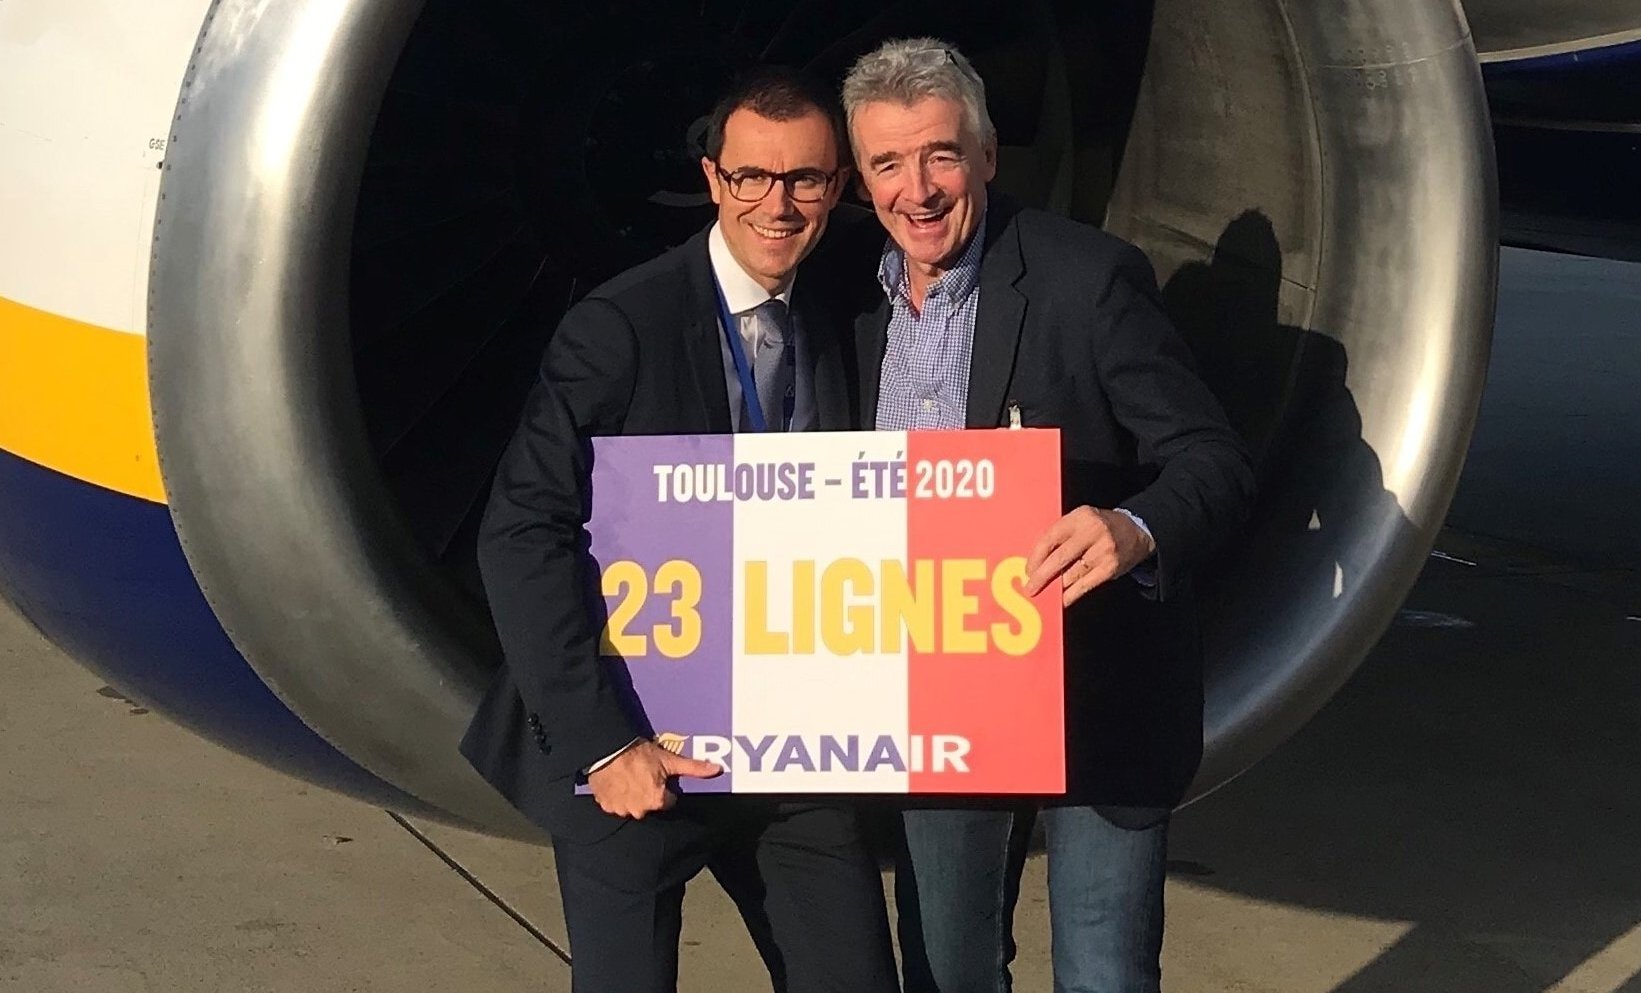 RYANAIR OPENS NEW TOULOUSE BASE AND S20 SCHEDULE